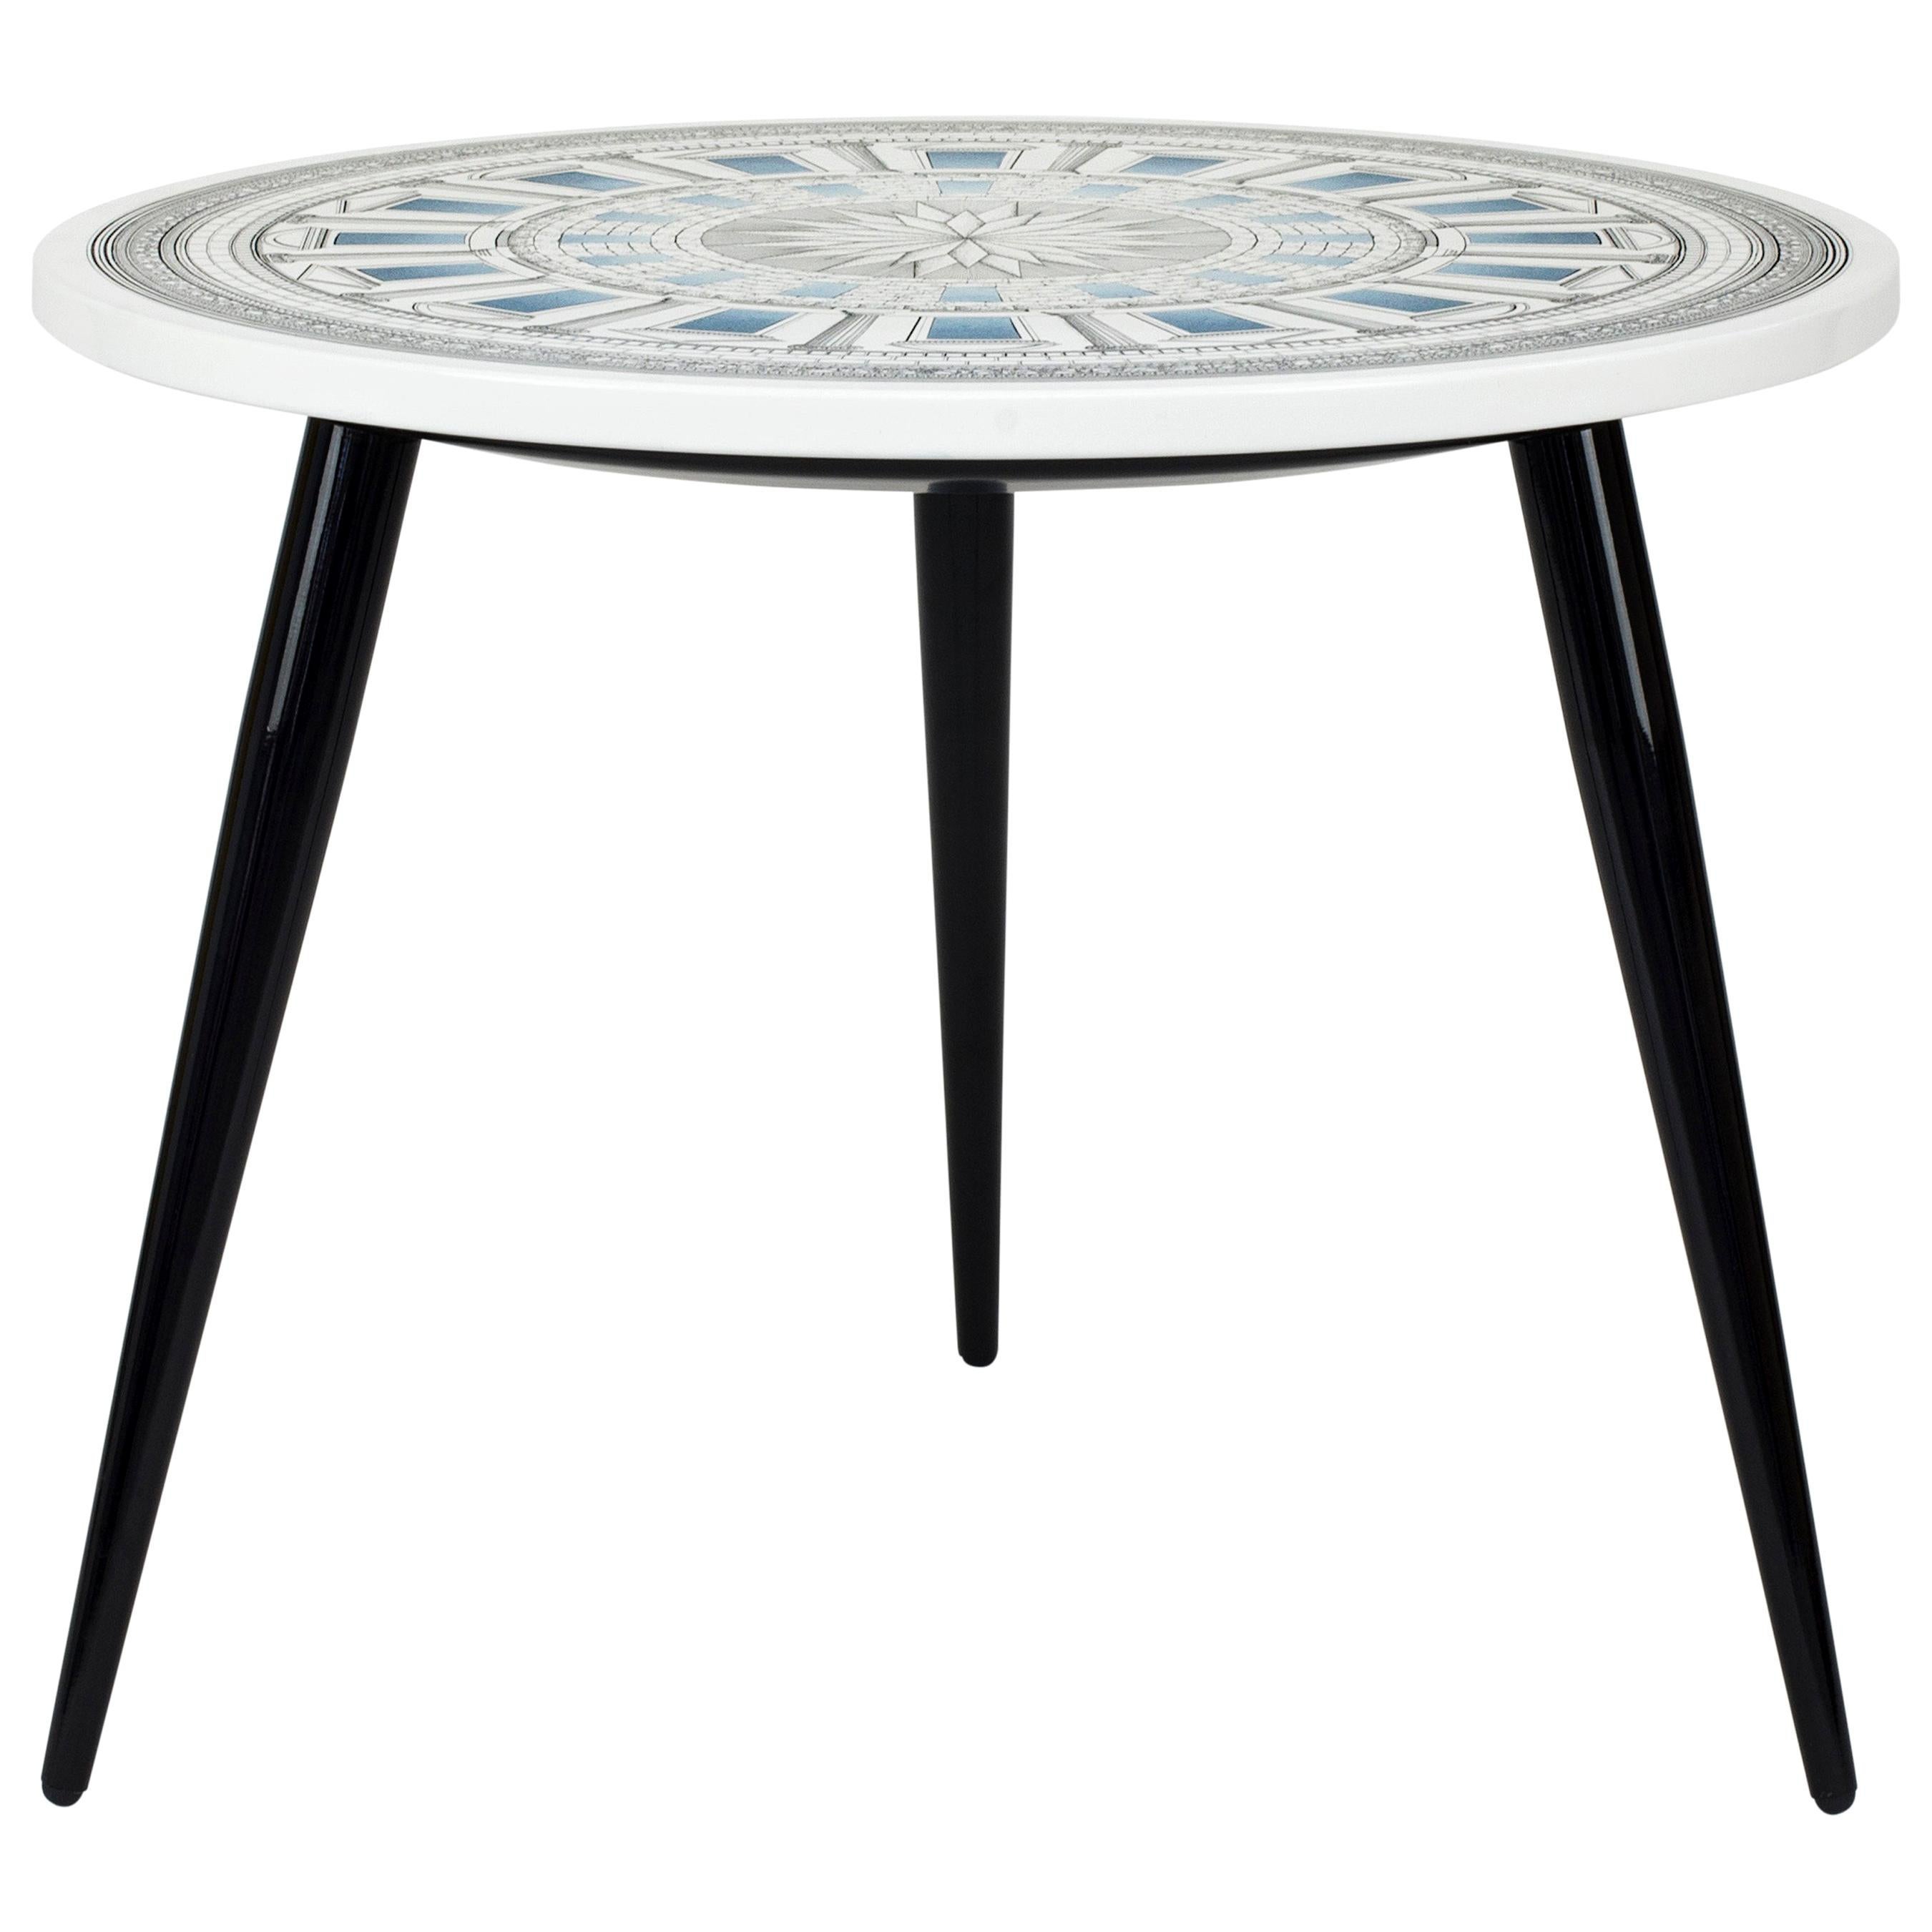 Fornasetti Table Top Cortile Celeste Architectural Motif, Wooden Legs For Sale